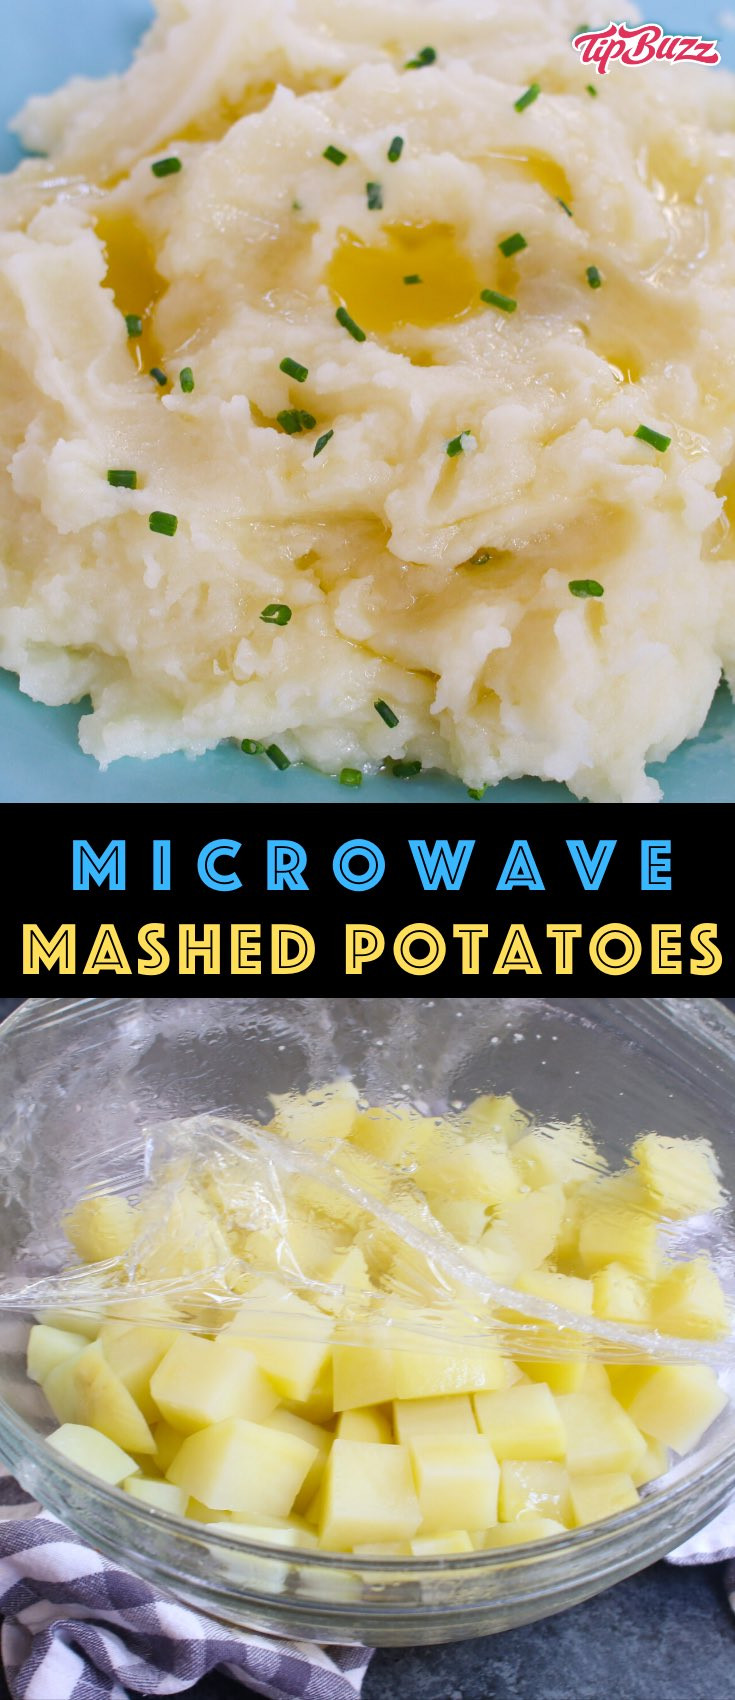 Mashed Potatoes Microwave
 15 Minute Microwave Mashed Potatoes Fluffy & Creamy